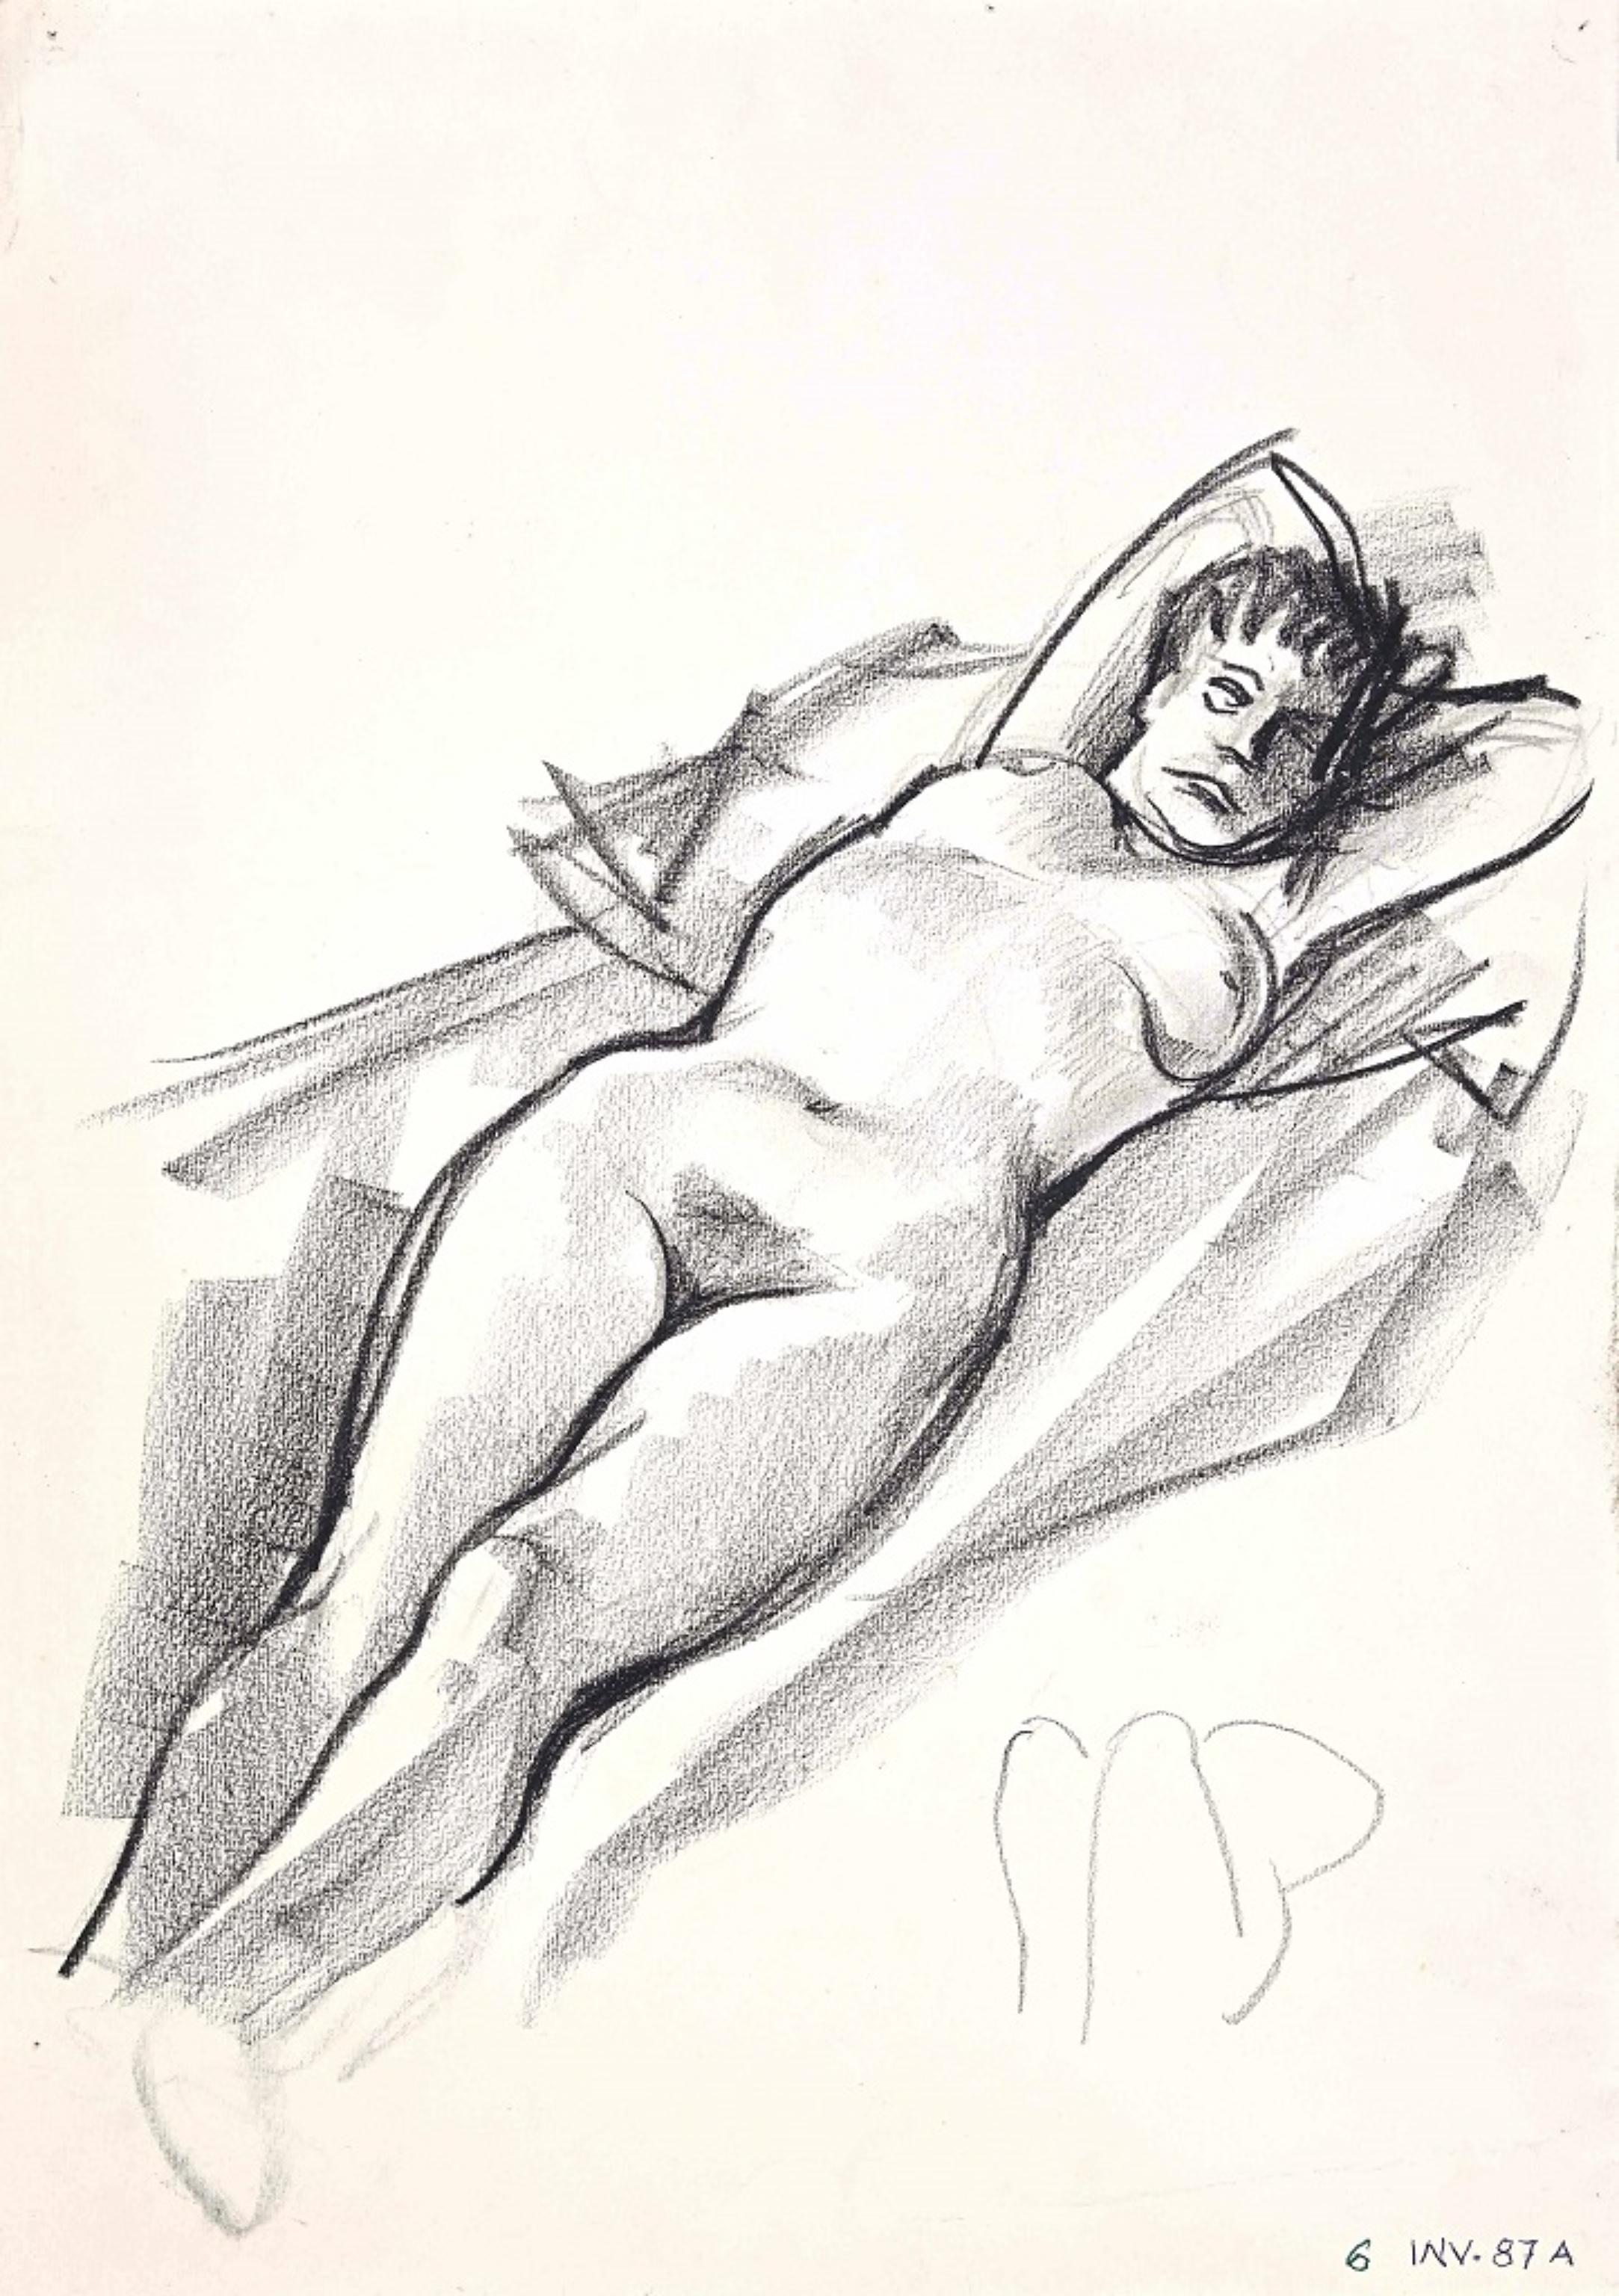 Female Nude - Charcoal Drawing - 1970s - Art by Leo Guida